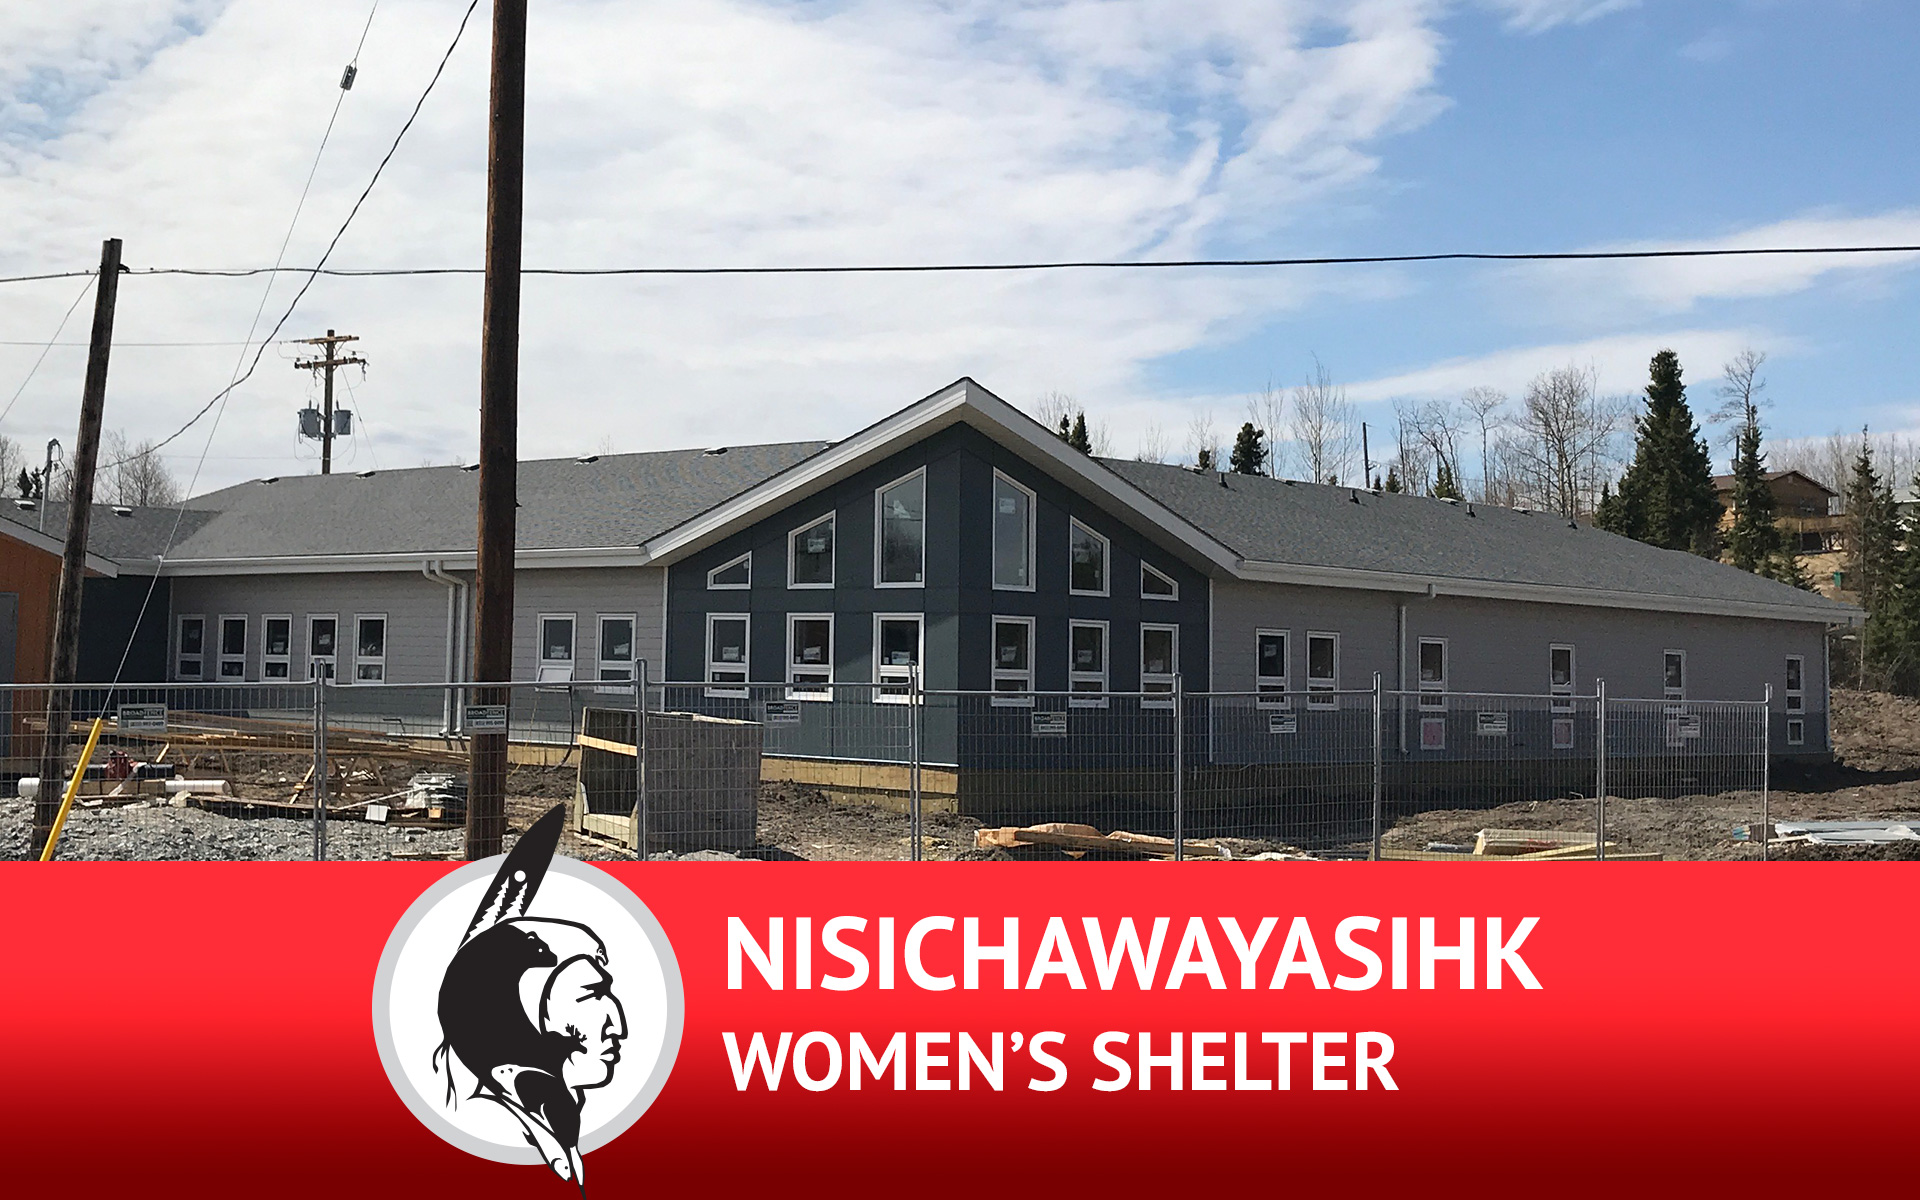 NCN's Woman's Shelter